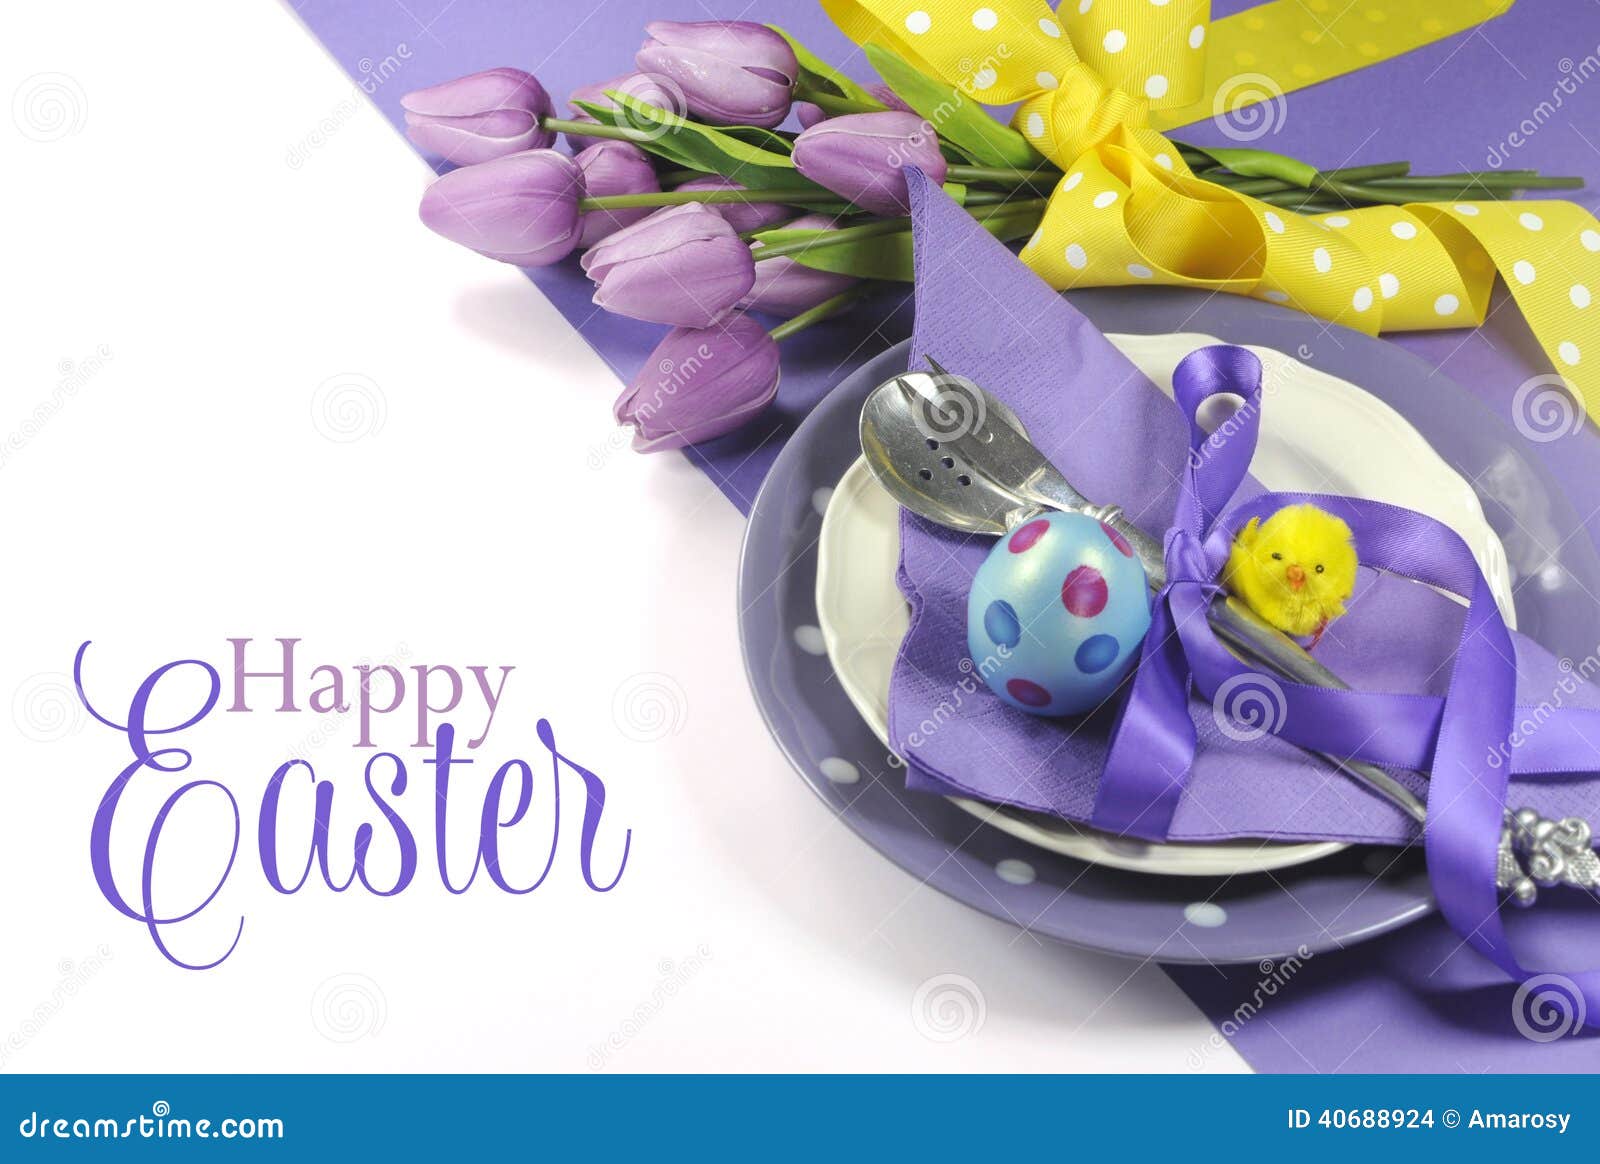 happy easter yellow and purple mauve lilac theme easter table place setting